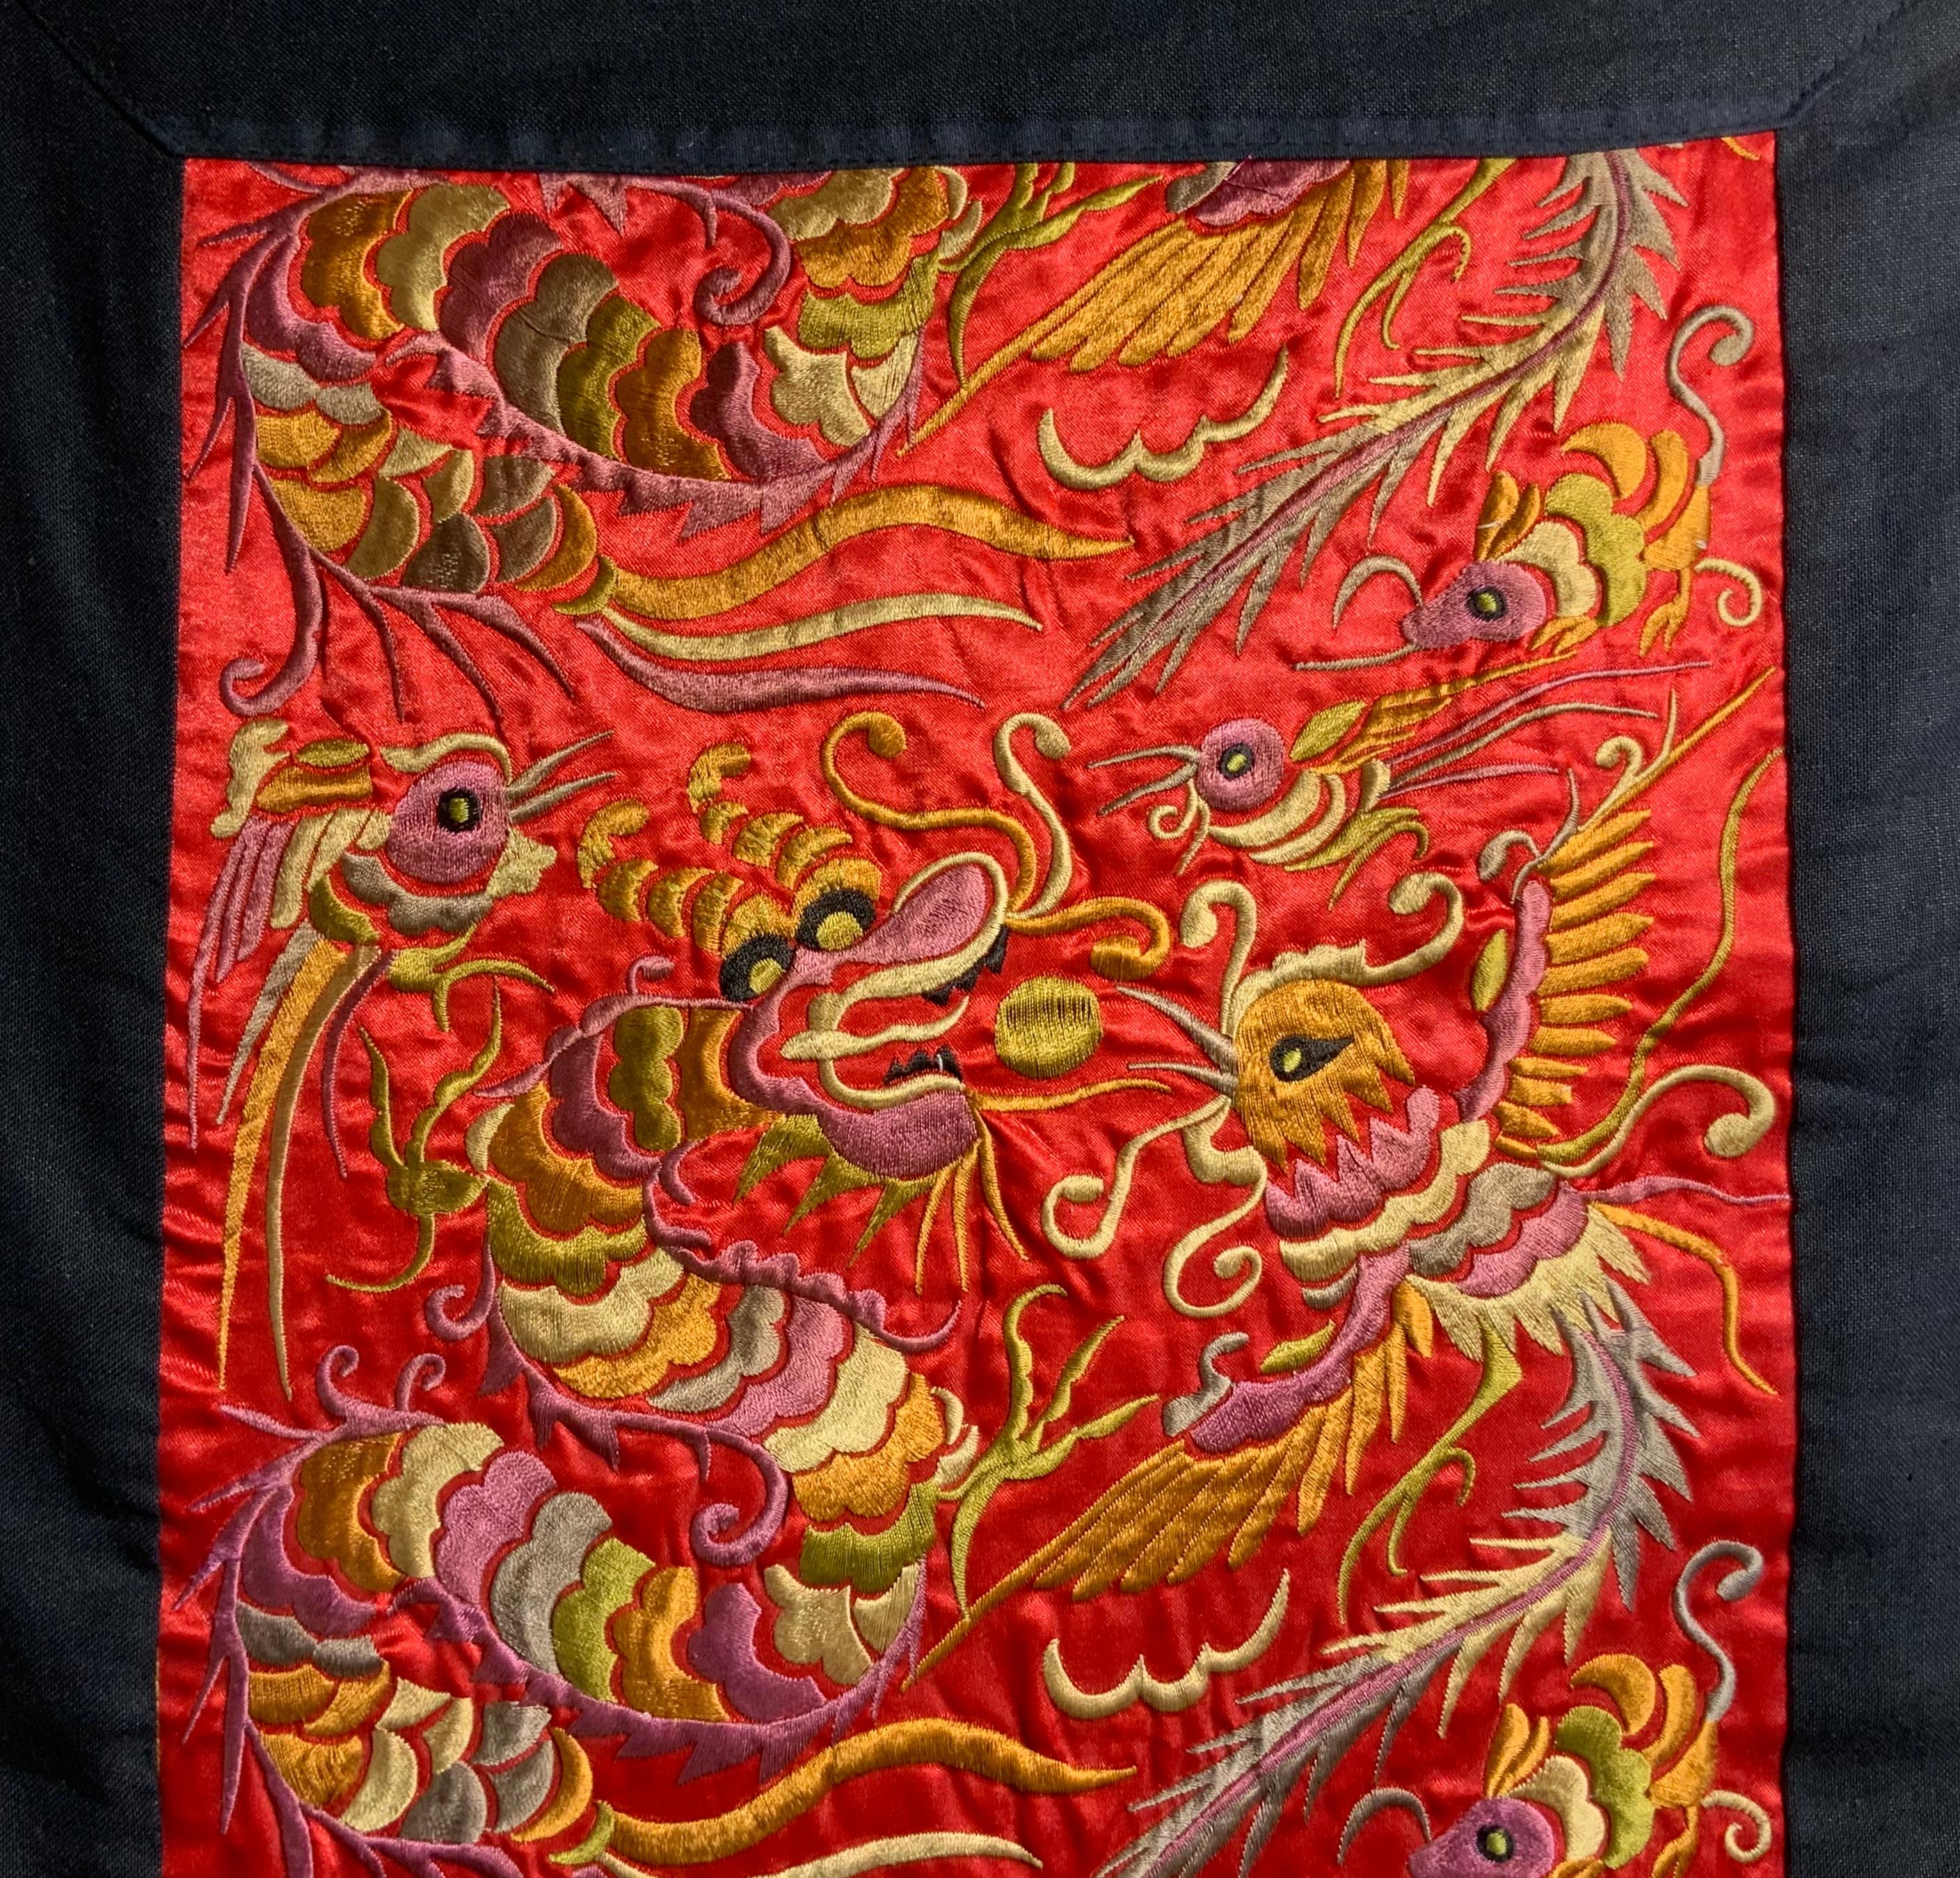 This is an incredible wall hanging made of embroidered silk satin. An antique piece from China, the traditional motifs show repeated scene of dragons and birds in perfect detail in polychrome silks. The hand embroidery is immaculate and shows a high